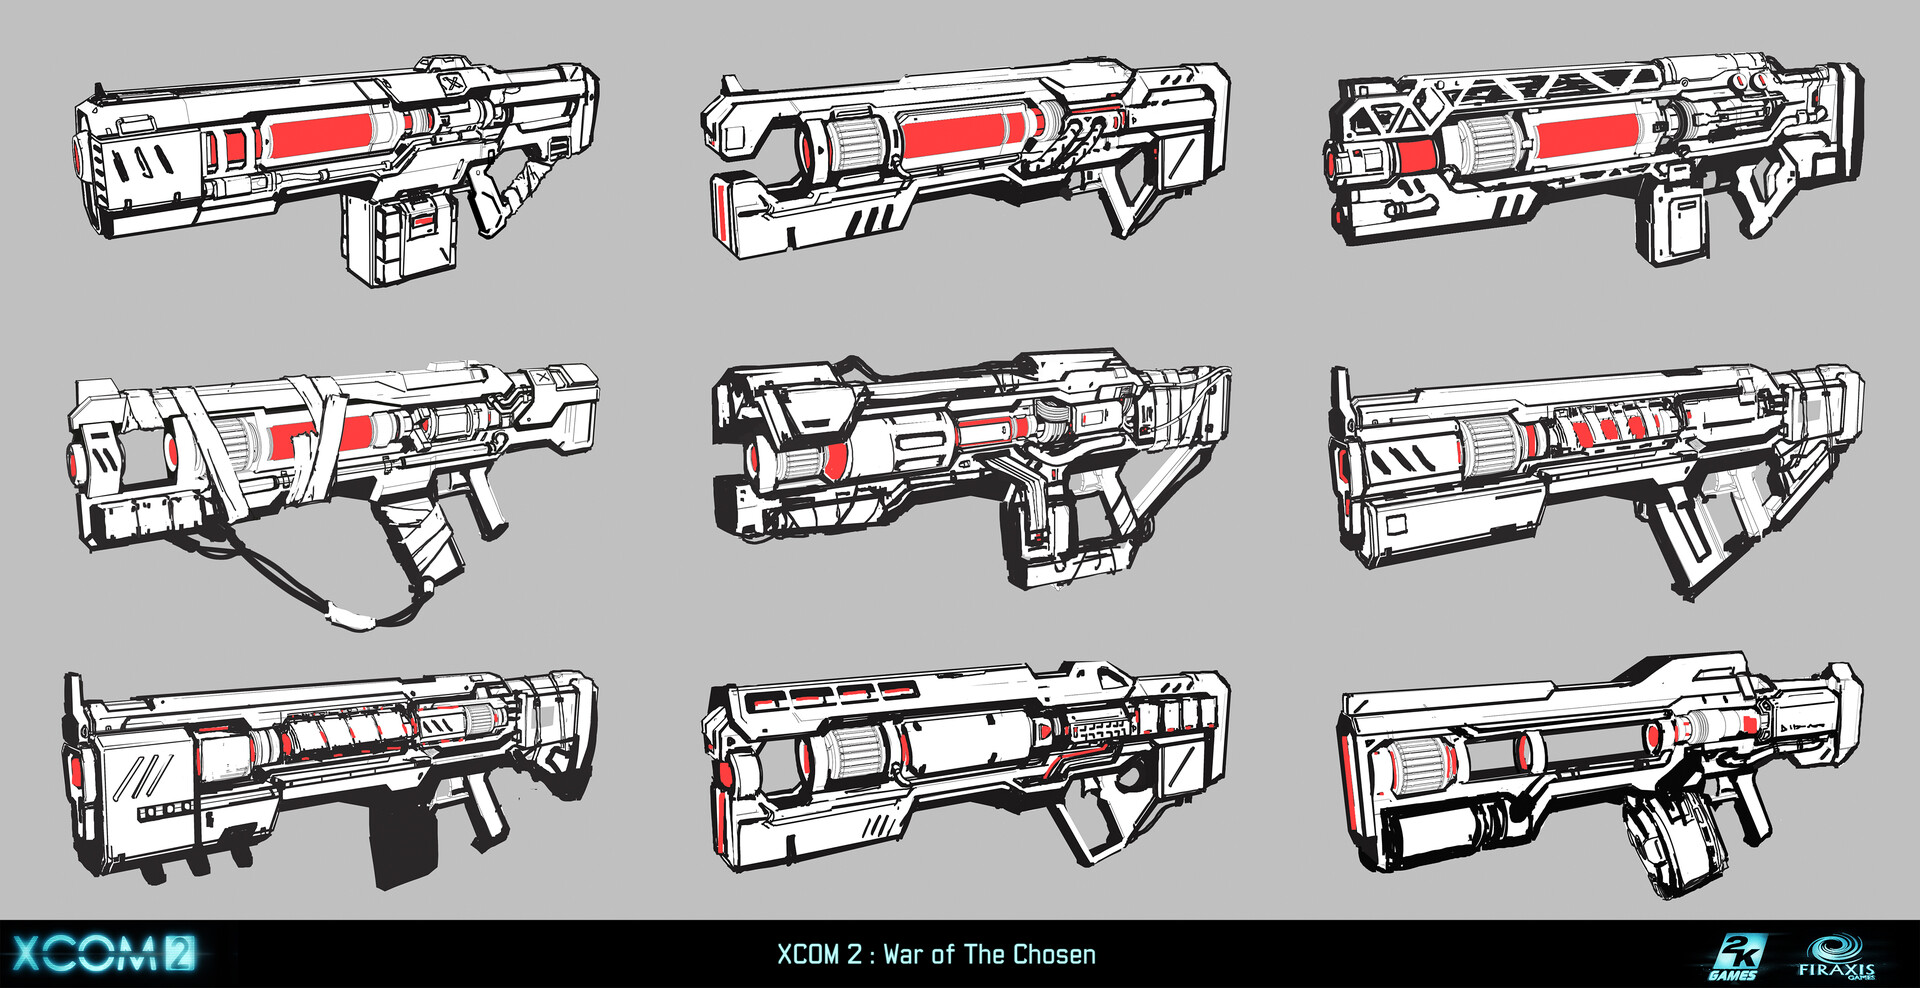 tolka on X: weapon concept I submitted for #deepwoken's weapon design  contest  / X